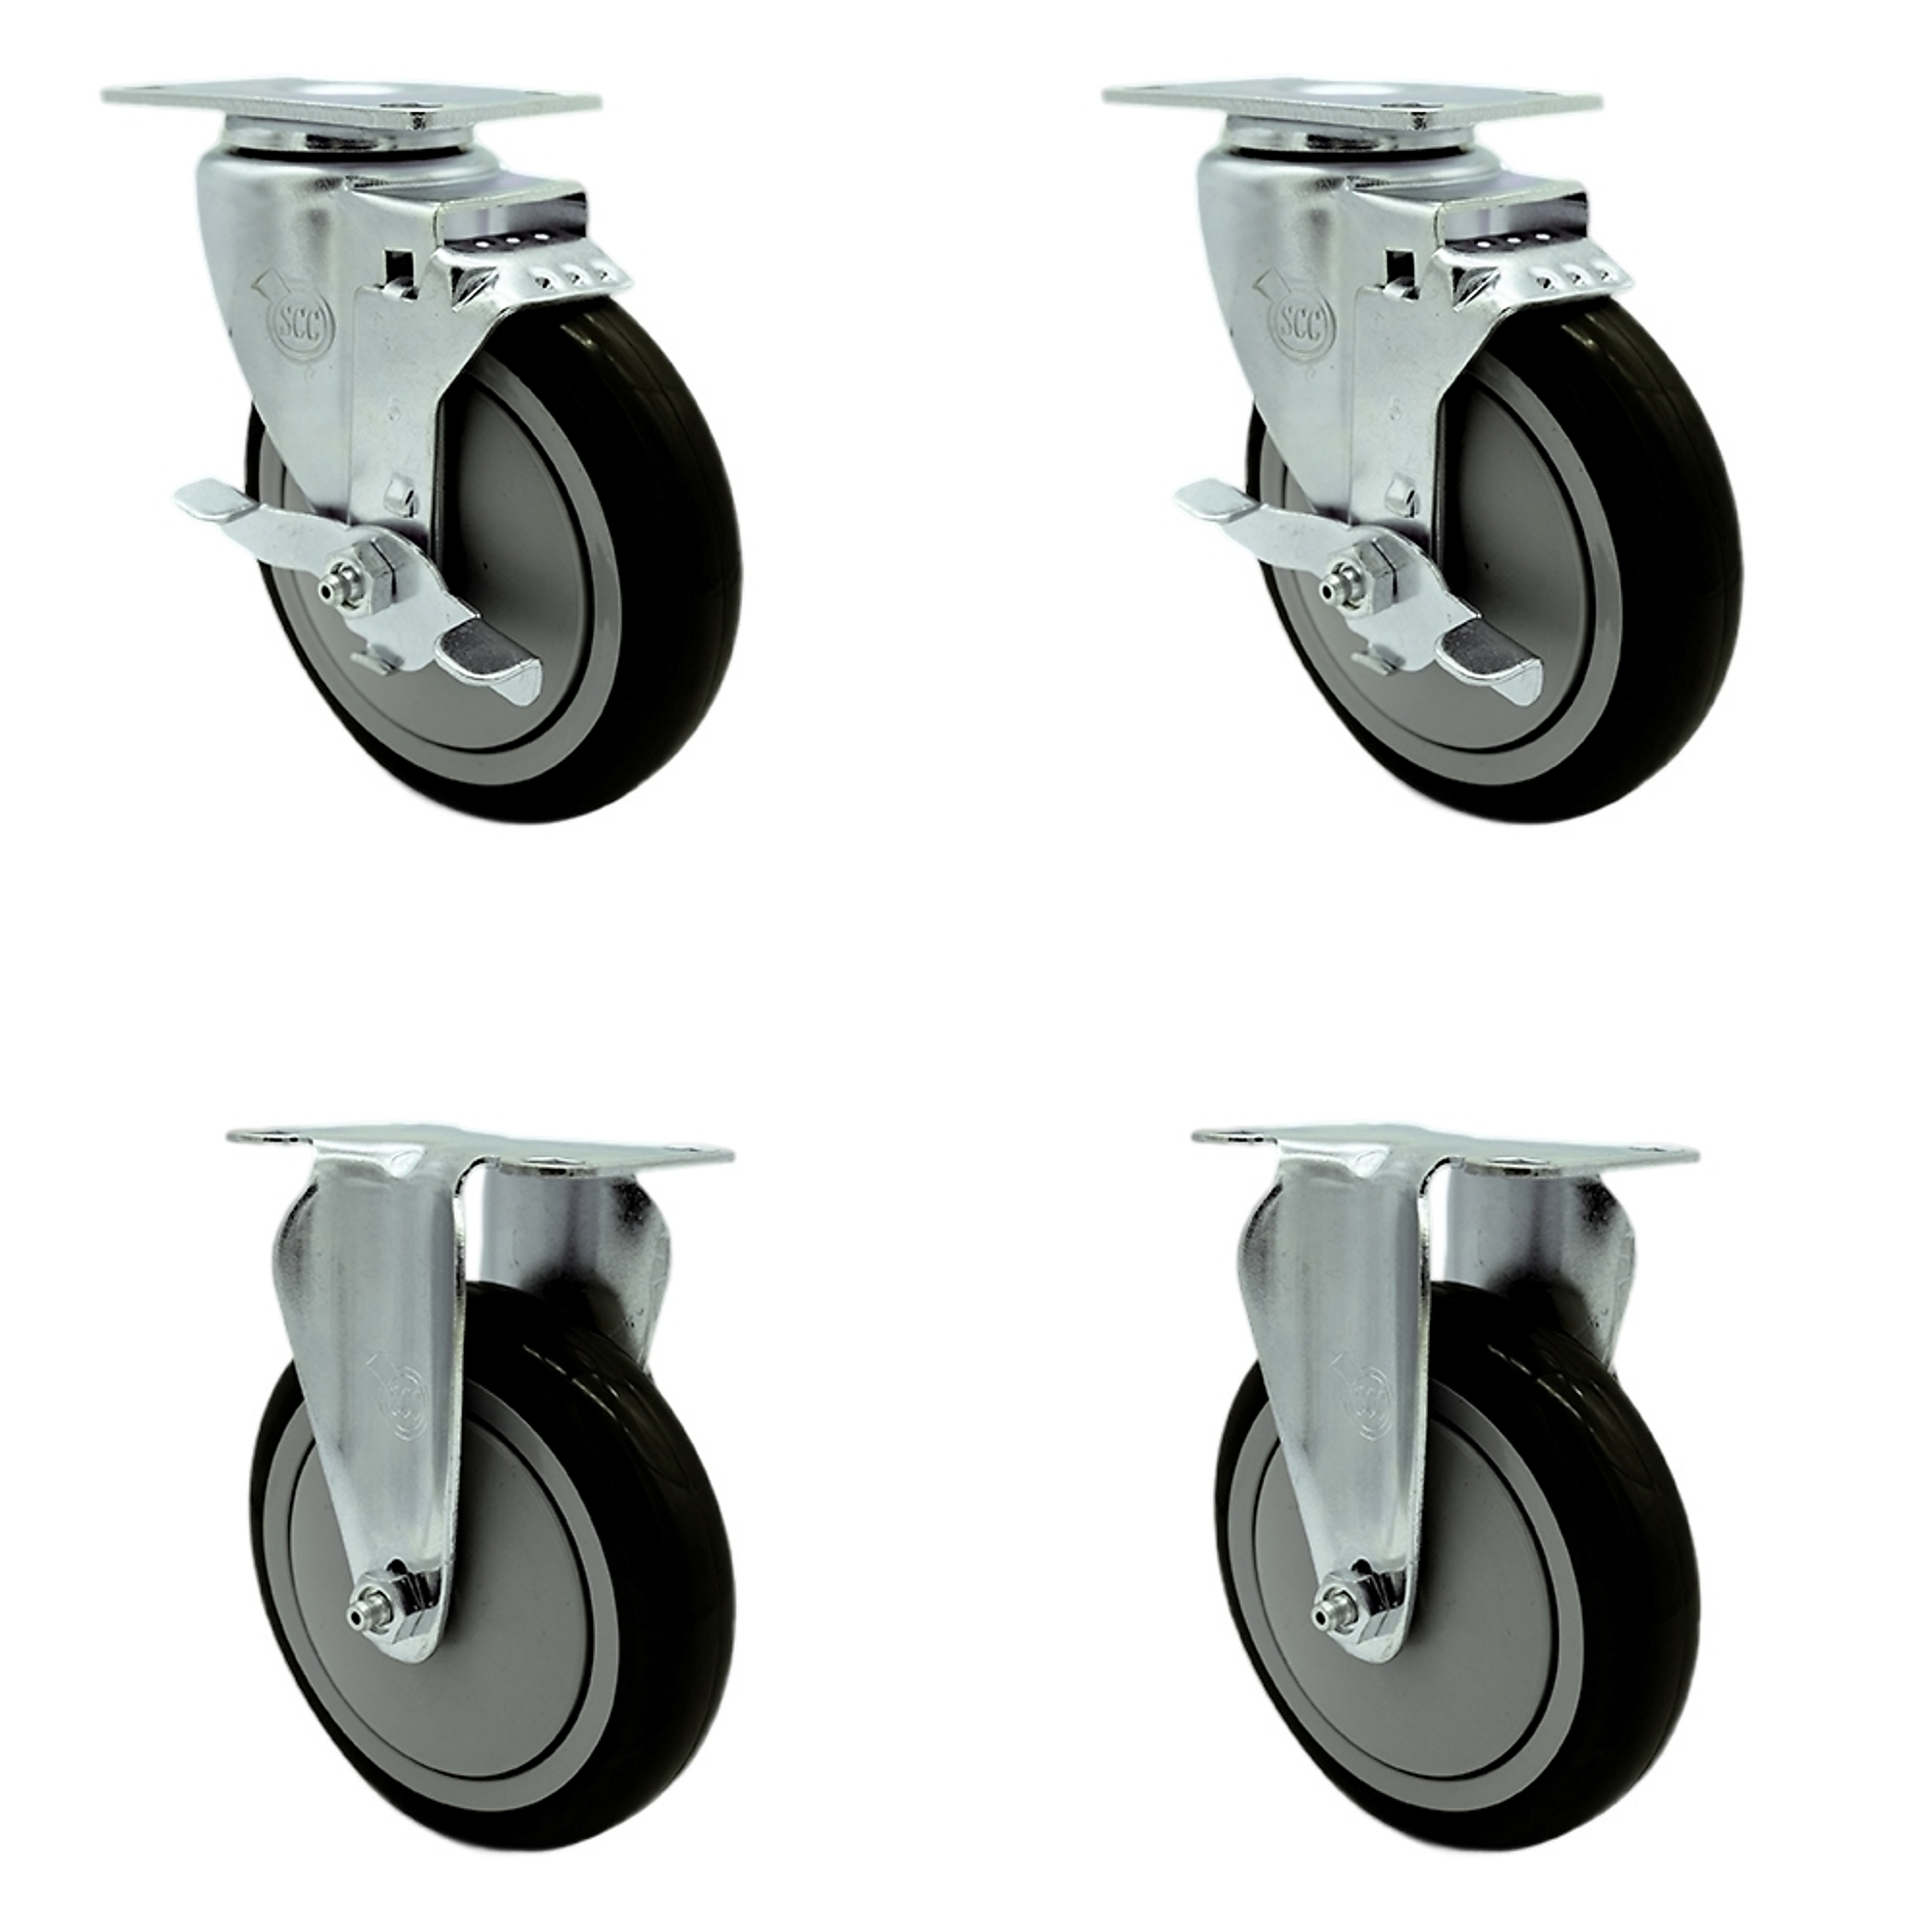 Service Caster, 5Inch x 1 1/4Inch Plate Casters, Wheel Diameter 5 in, Caster Type Swivel, Package (qty.) 4, Model CAM-SCC-20S514-PPUB-BLK-TLB-2-R514-2 -  734005058314